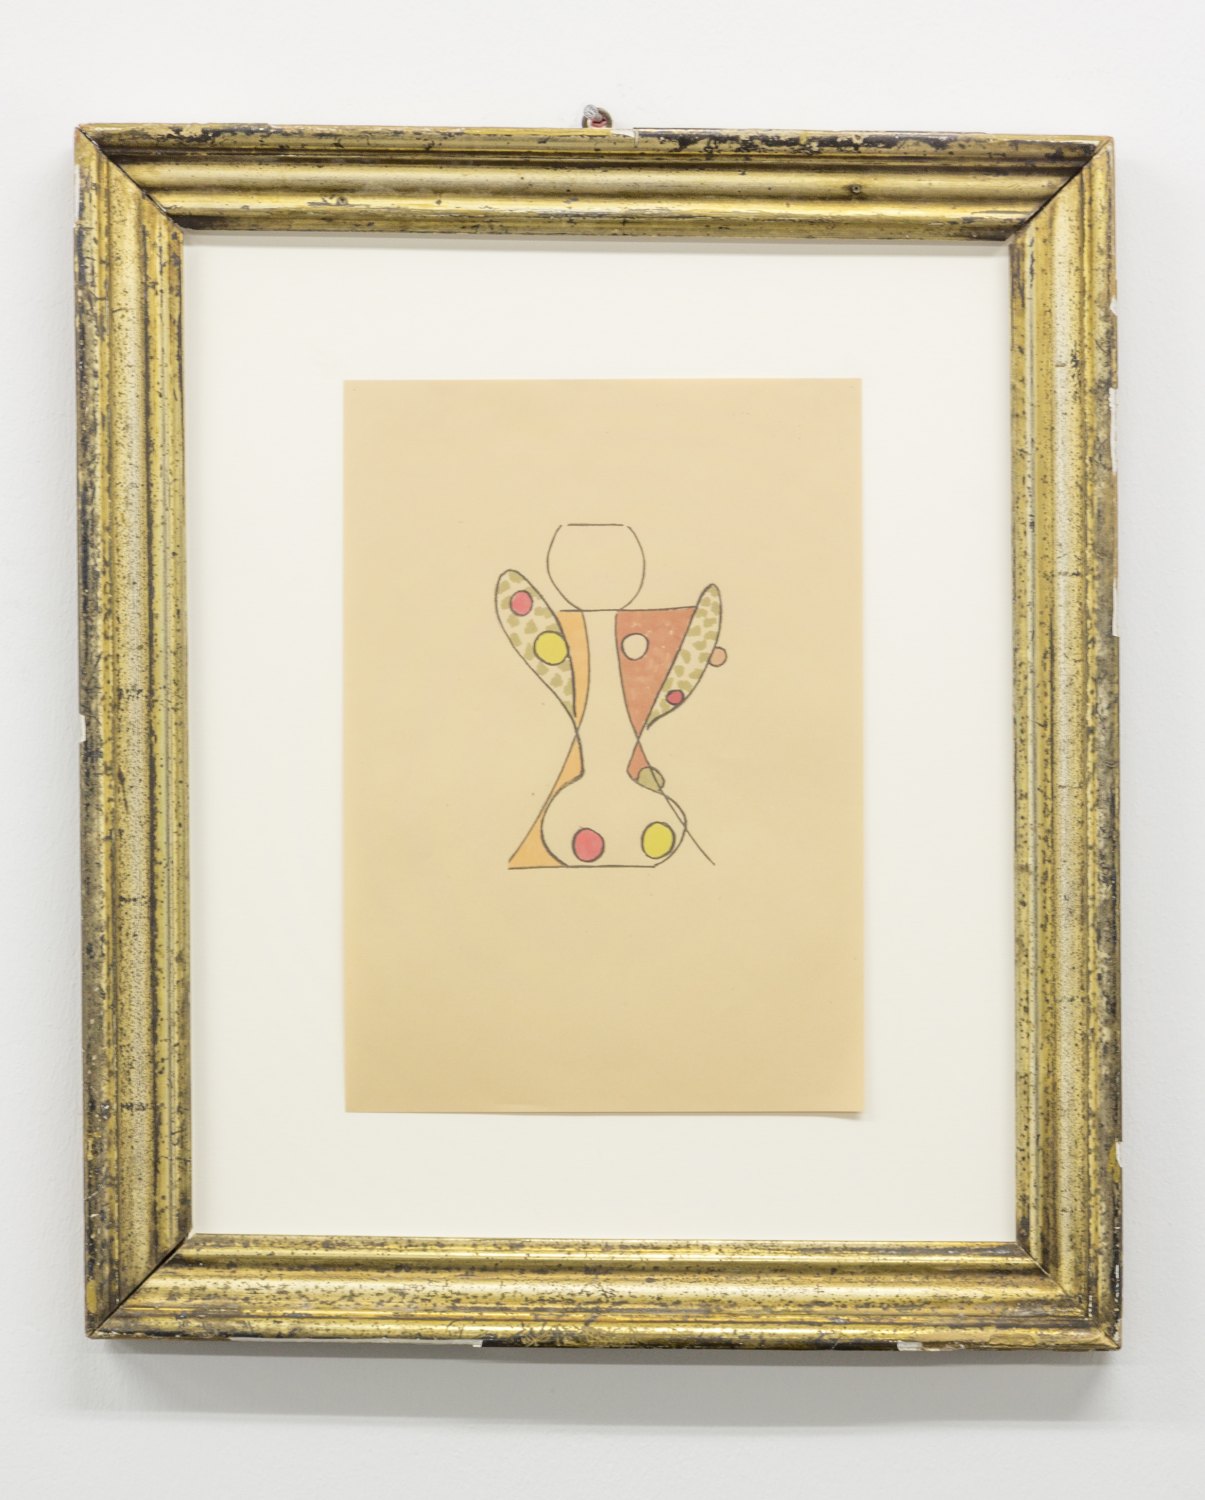 Marc Camille Chaimowicz Untitled, 2014 Mixed media on paper, 29.7 × 21 cm